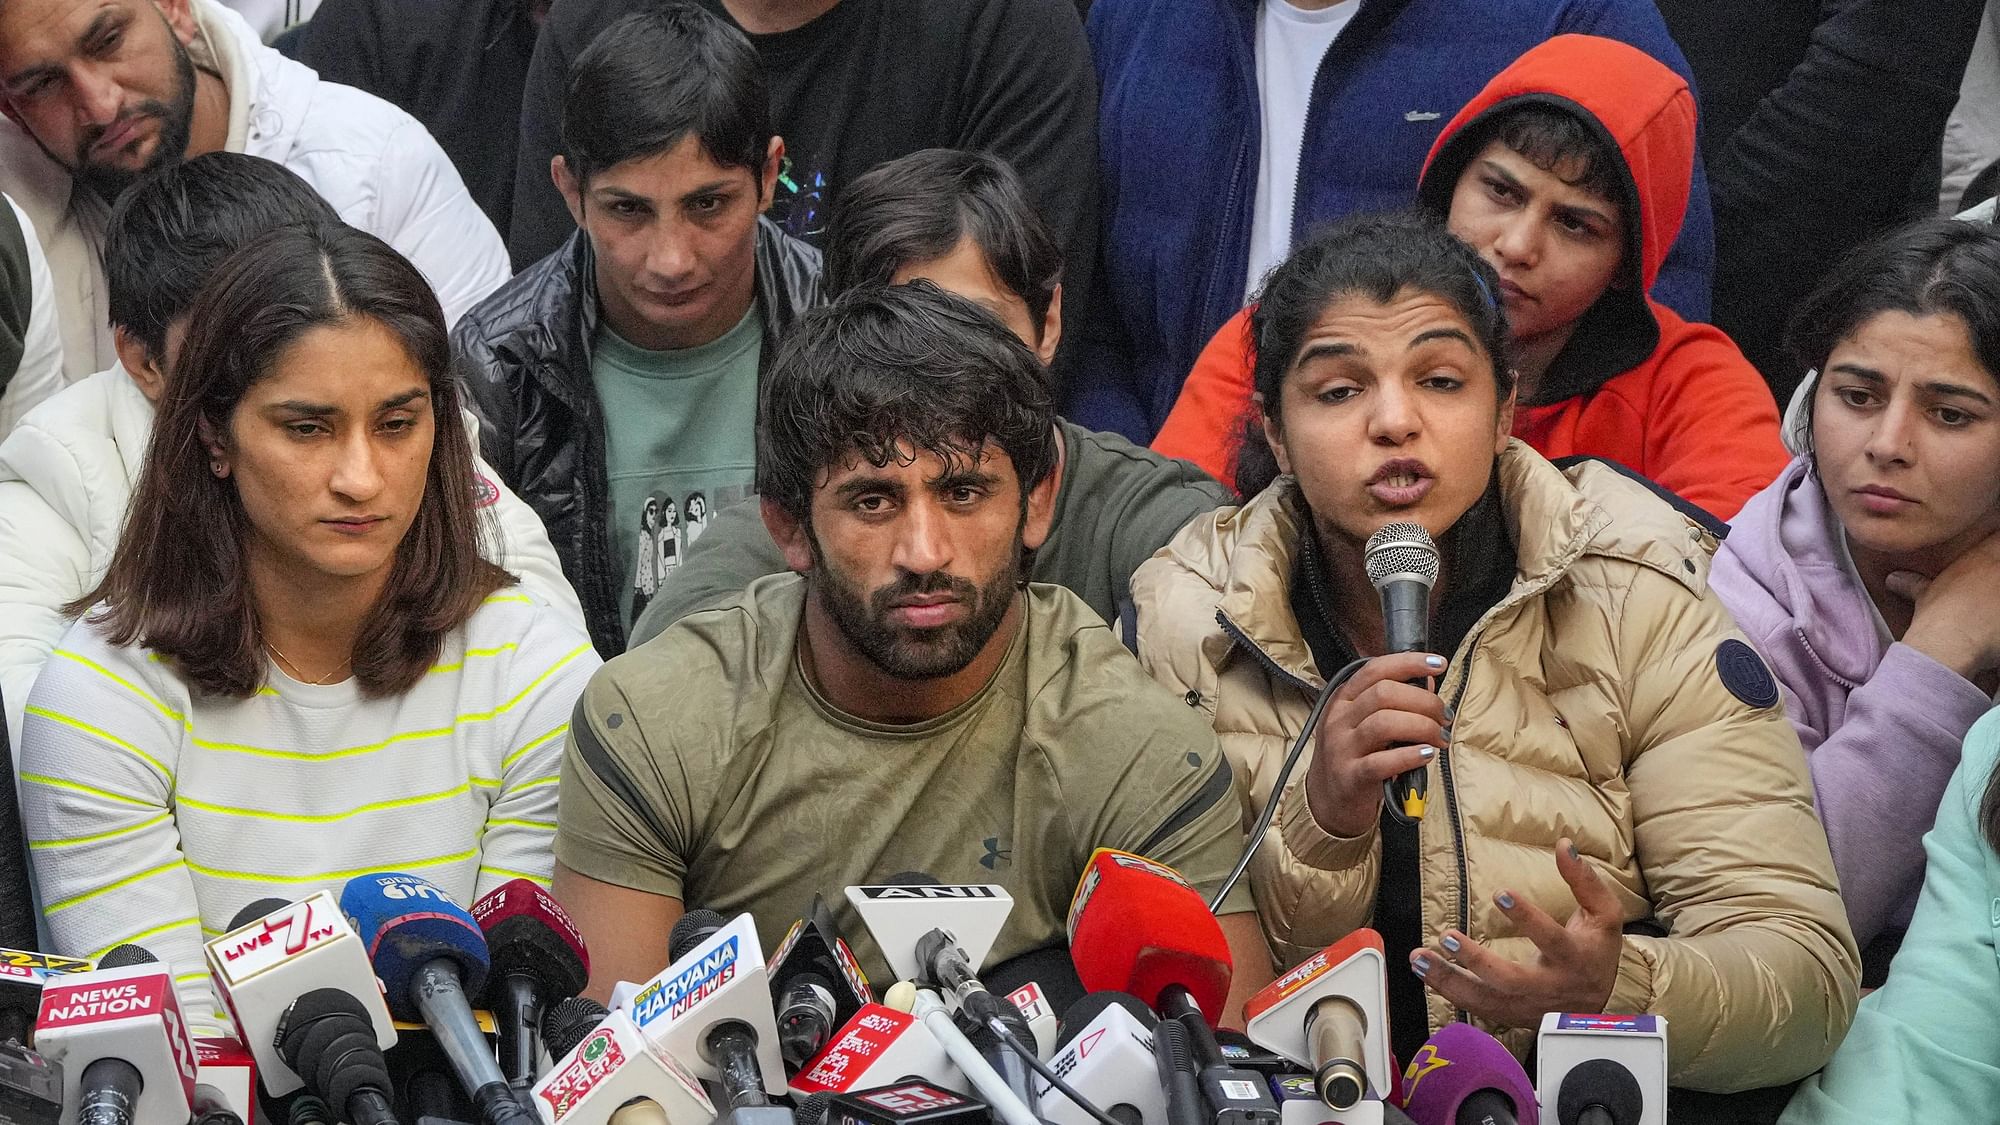 <div class="paragraphs"><p>Wrestlers Vinesh Phogat, Sakshi Malik and Bajrang Punia were among the many wrestlers who protested against the WFI.</p></div>